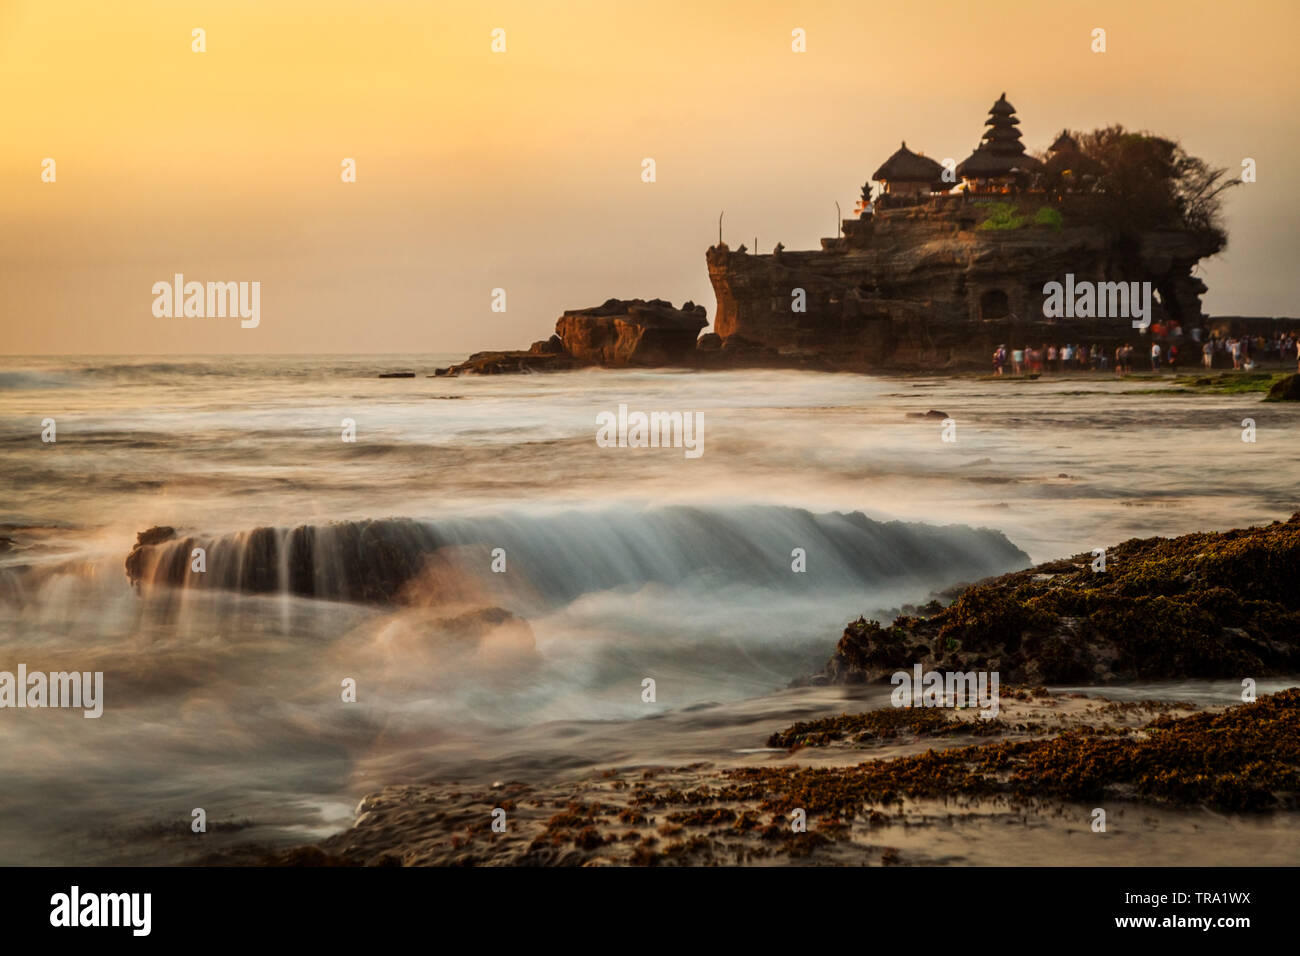 Tanah Lot Temple sunset view from a distance with a long exposure creative photography effect used to capture the incoming tide and breaking waves Stock Photo